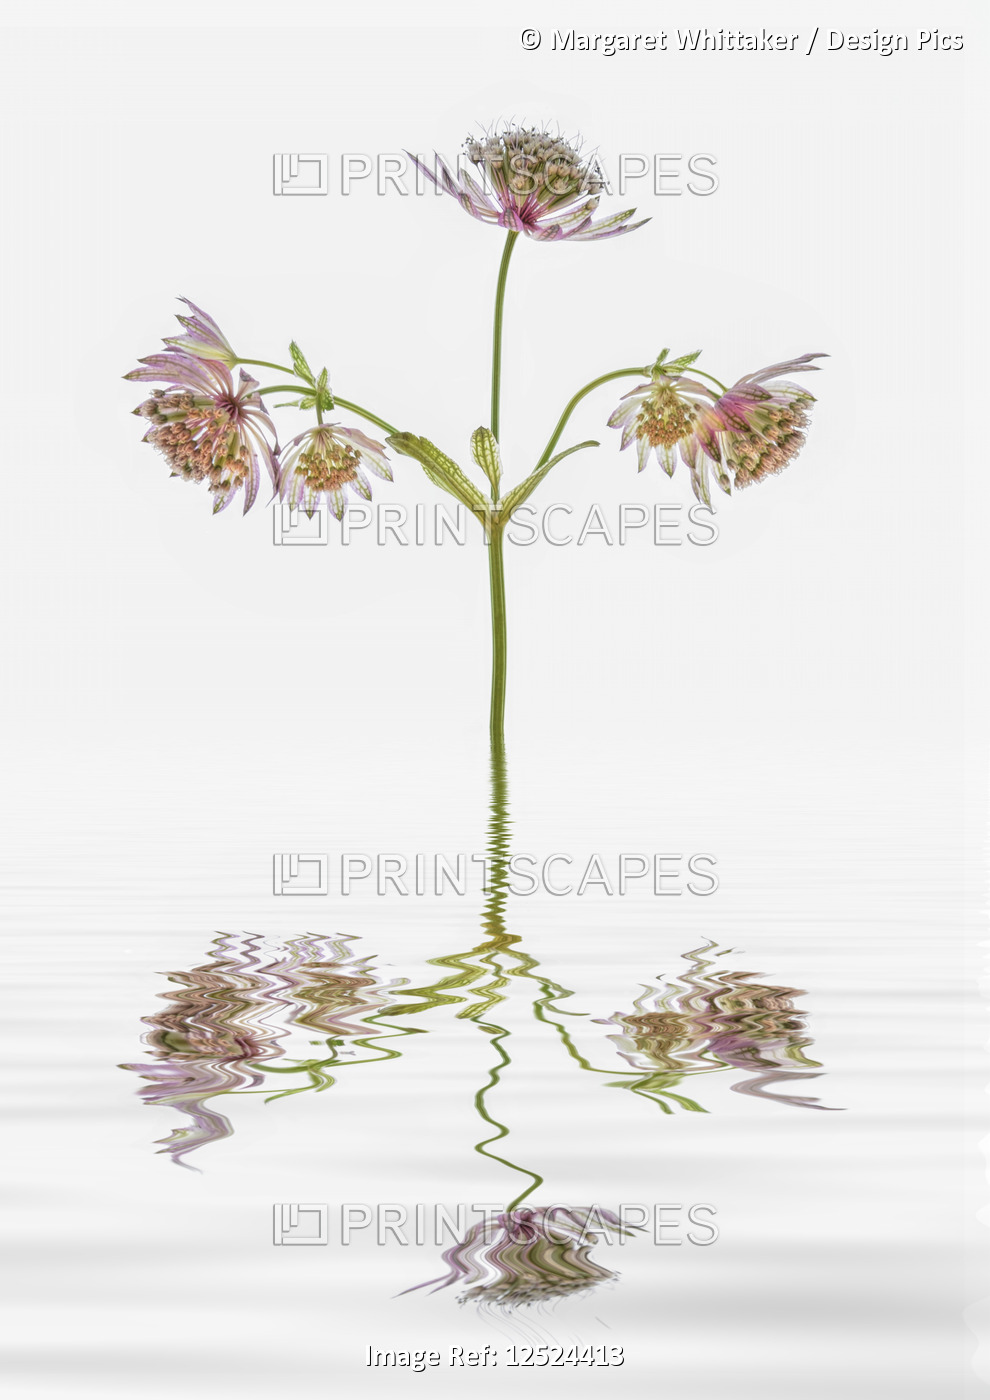 Astrantia flowers reflected in water